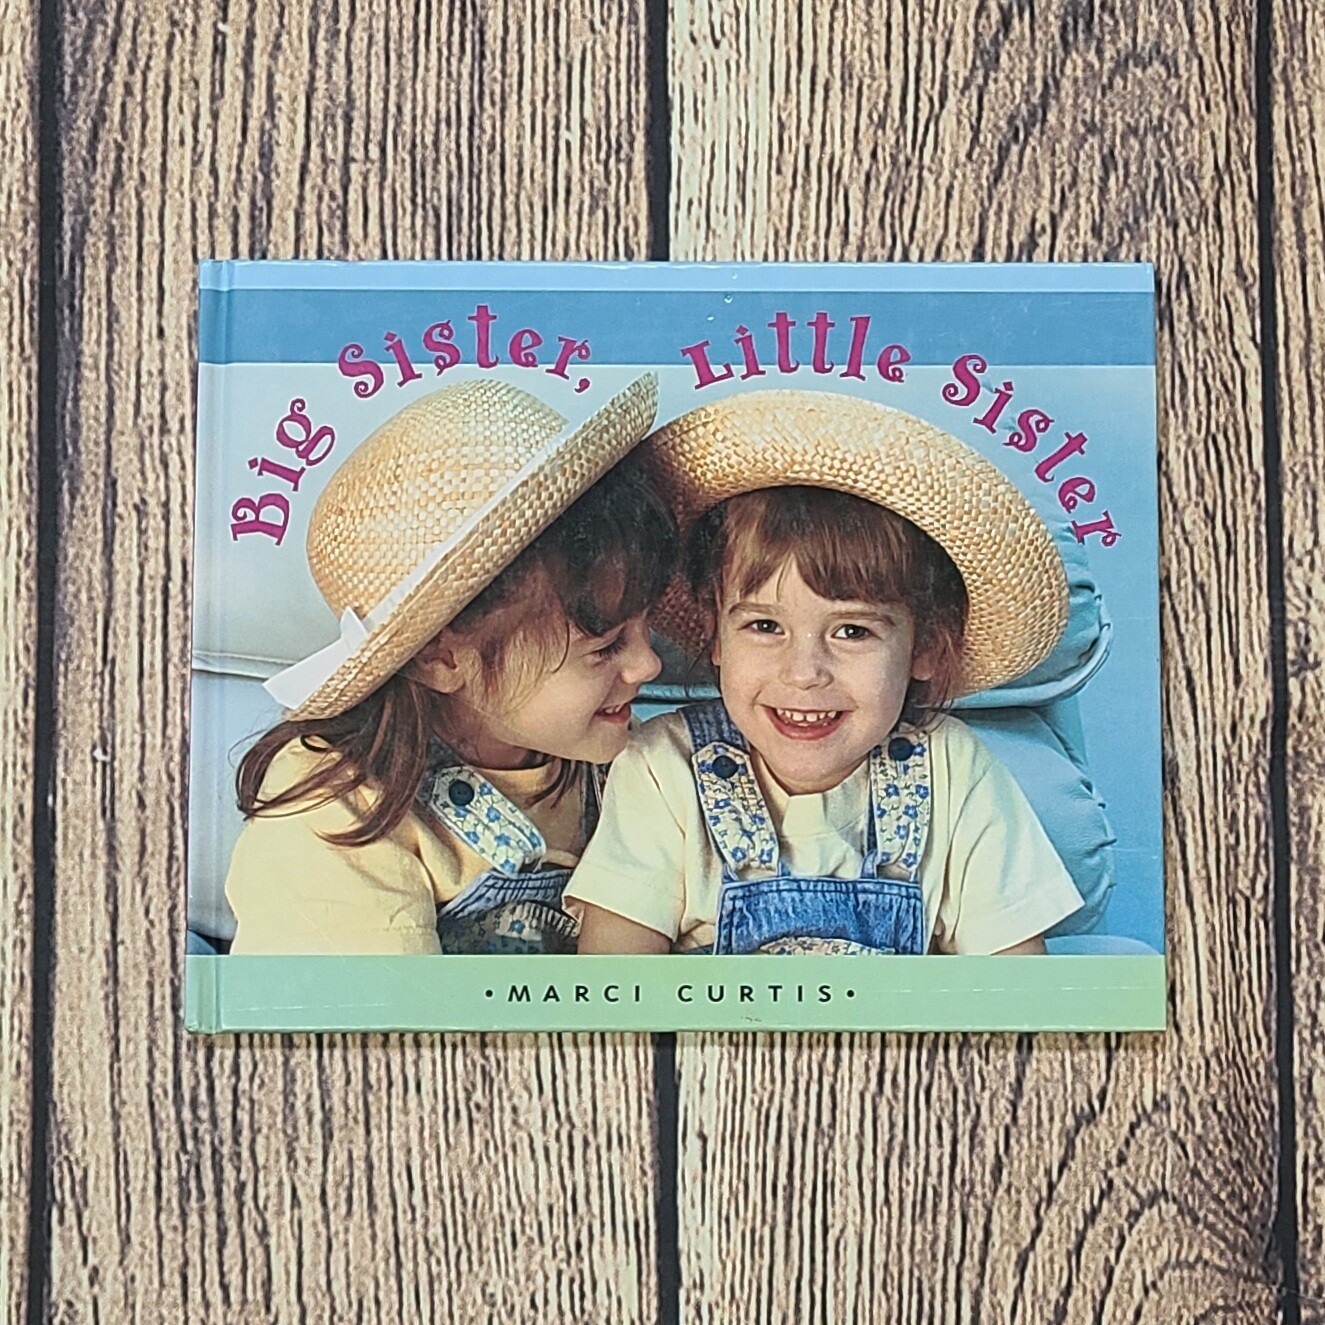 Big Sister, Little Sister by Marci Curtis